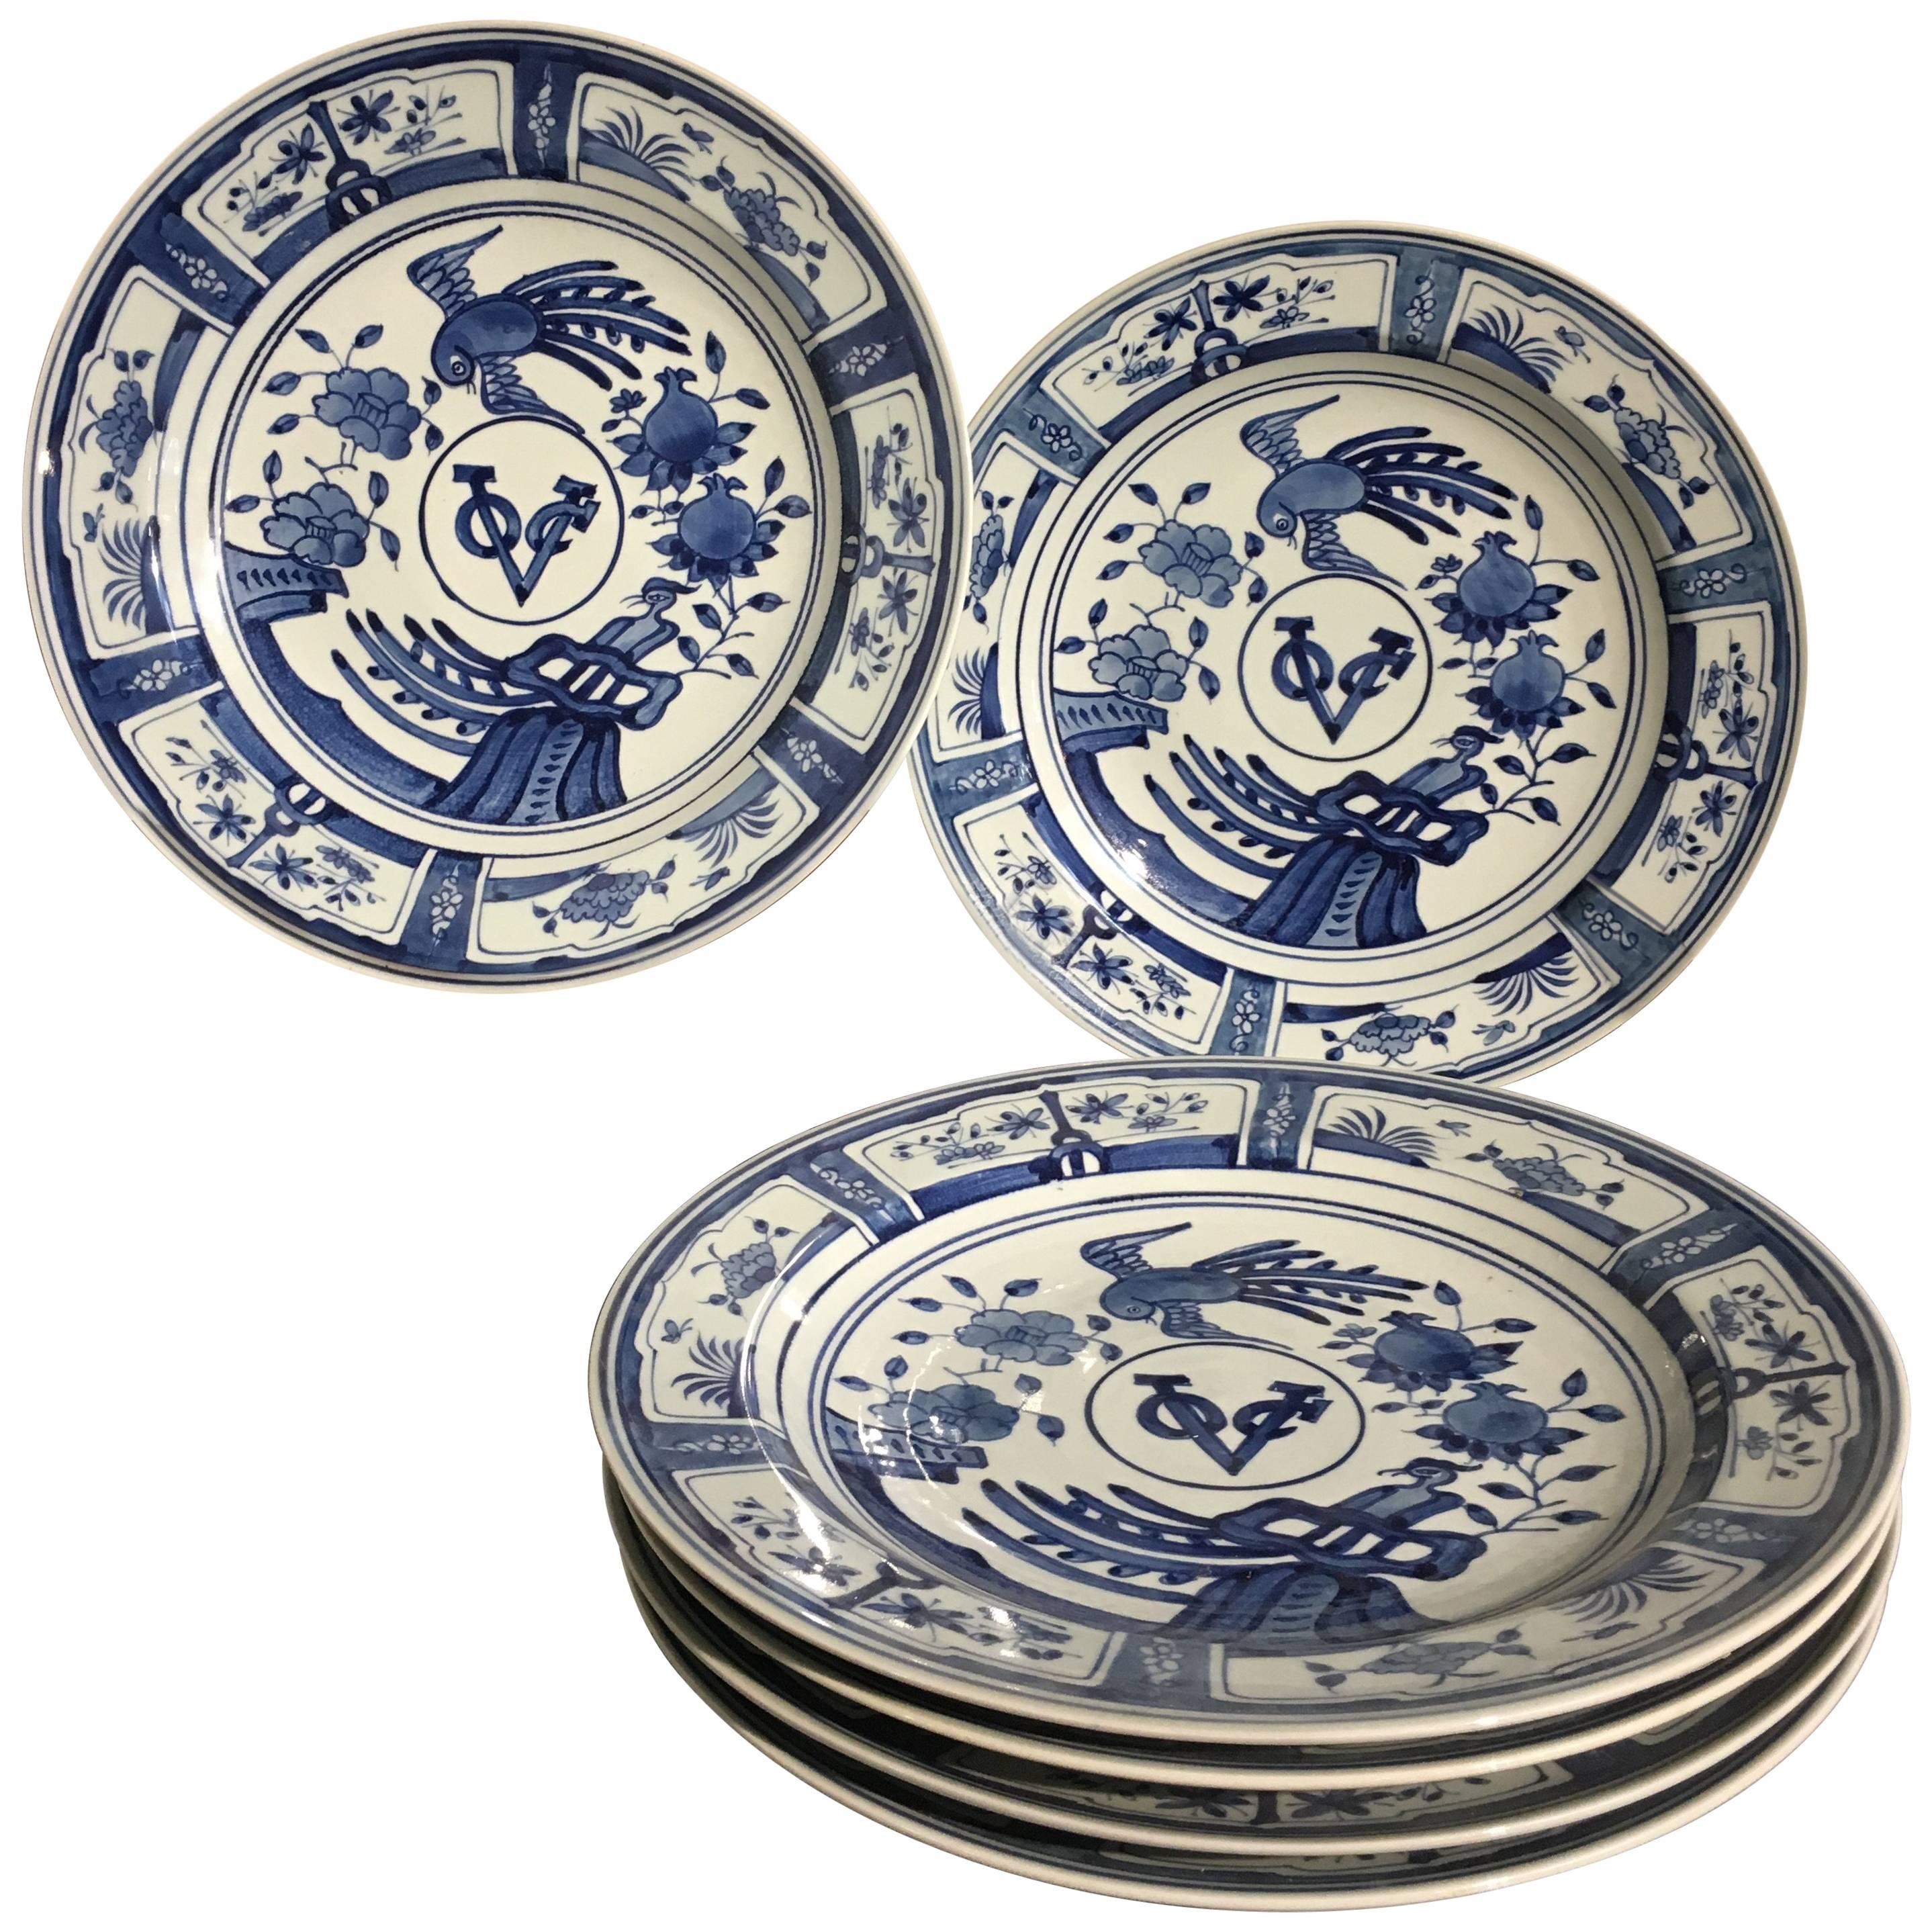 Six VOC Chinese Export Style Blue and White Porcelain Chargers, 20th Century